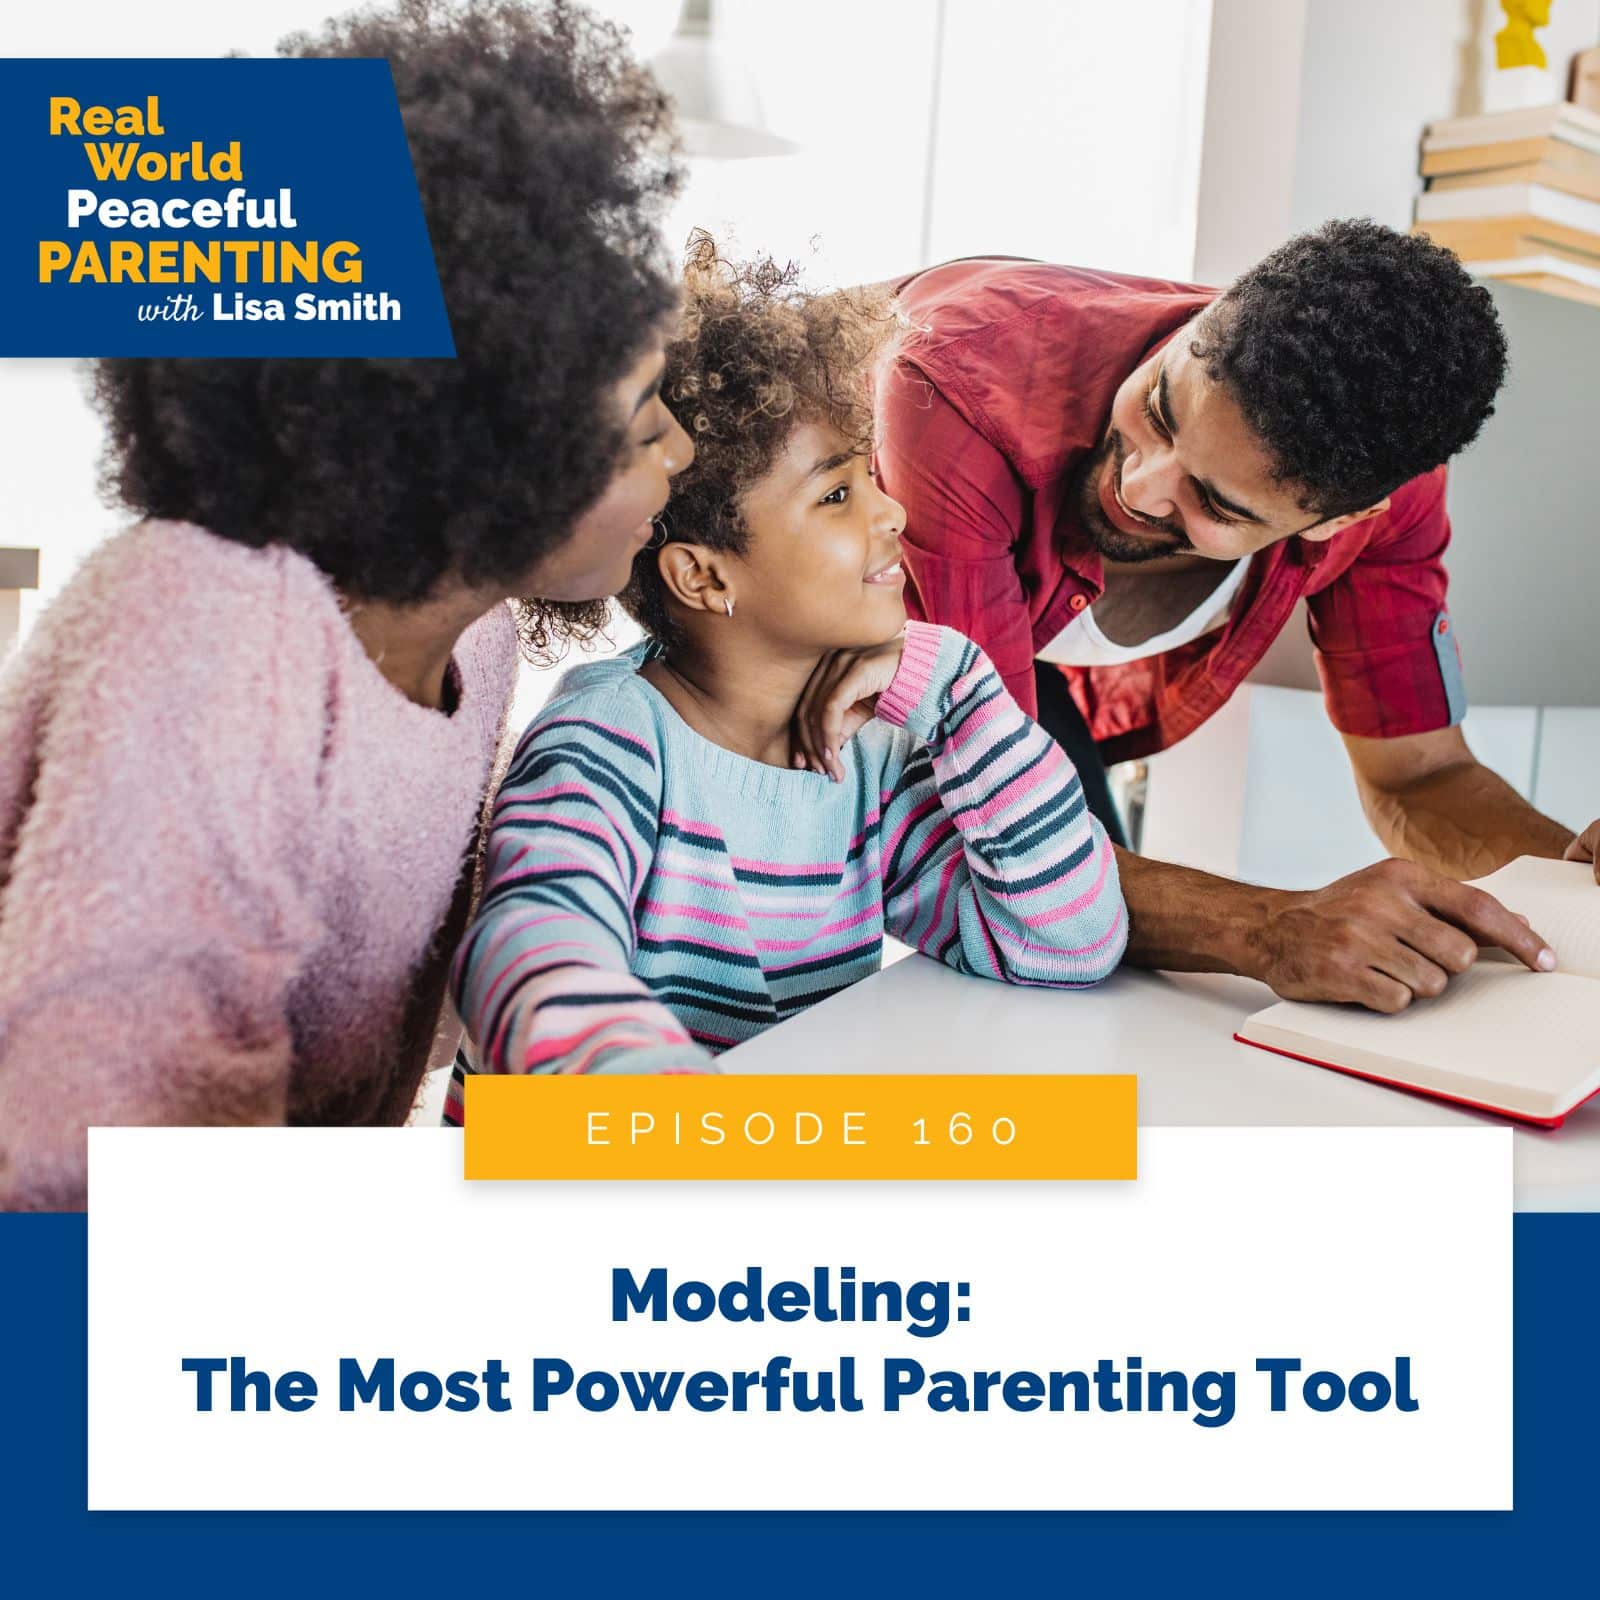 Real World Peaceful Parenting with Lisa Smith | Modeling: The Most Powerful Parenting Tool